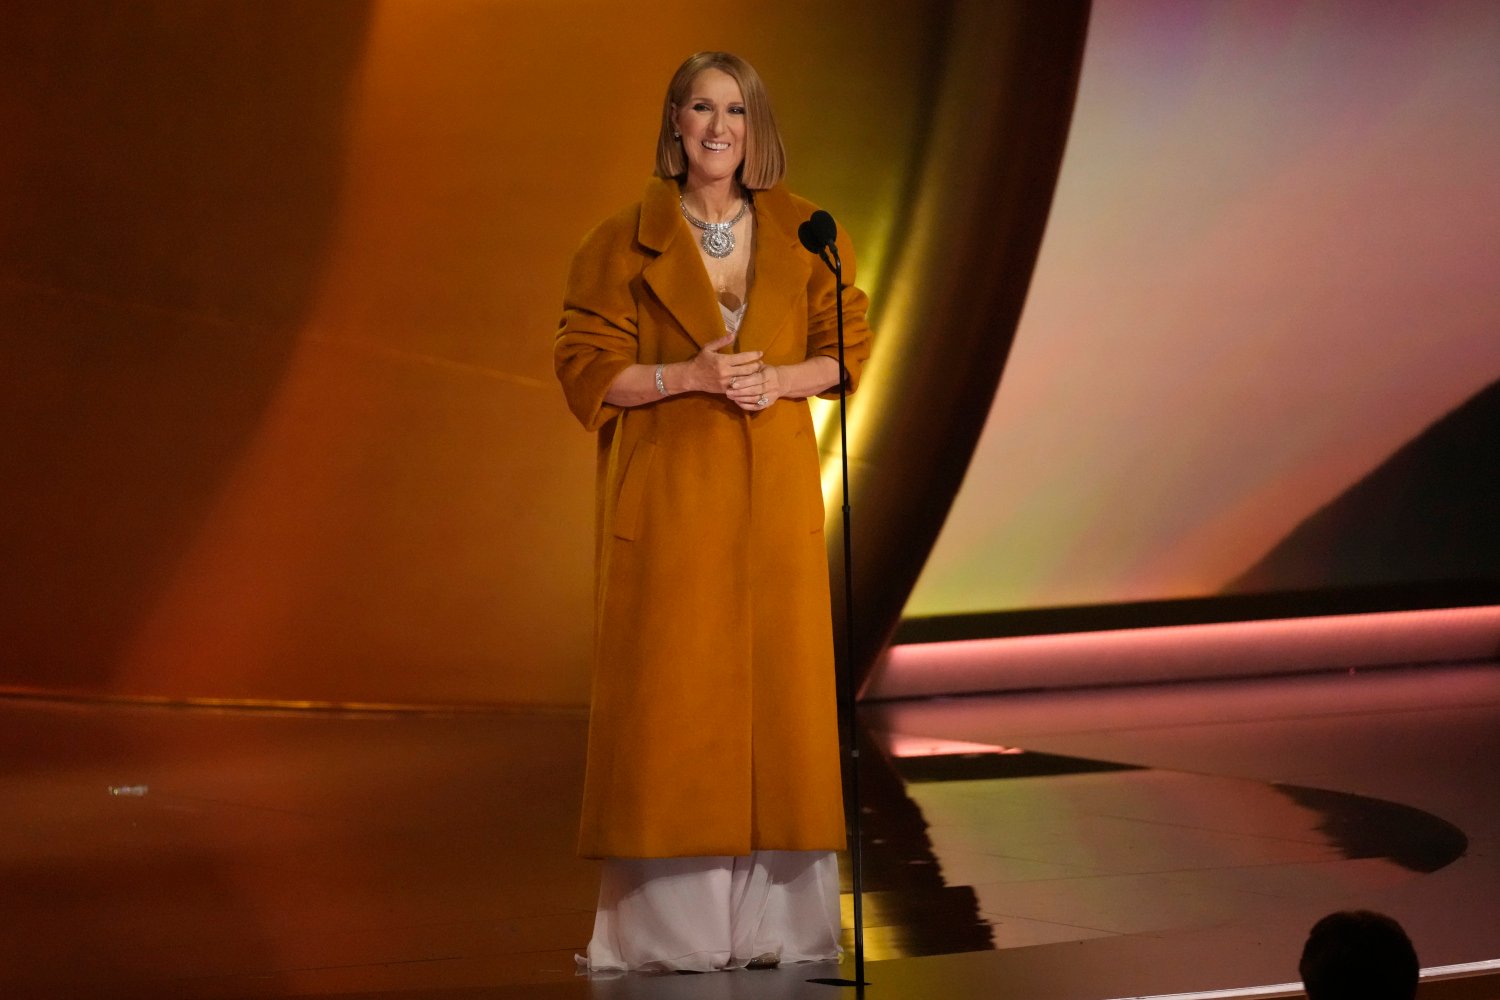 Celine Dion's Triumphant Grammy Return in Valentino: A Night of Music, Fashion, and Resilience